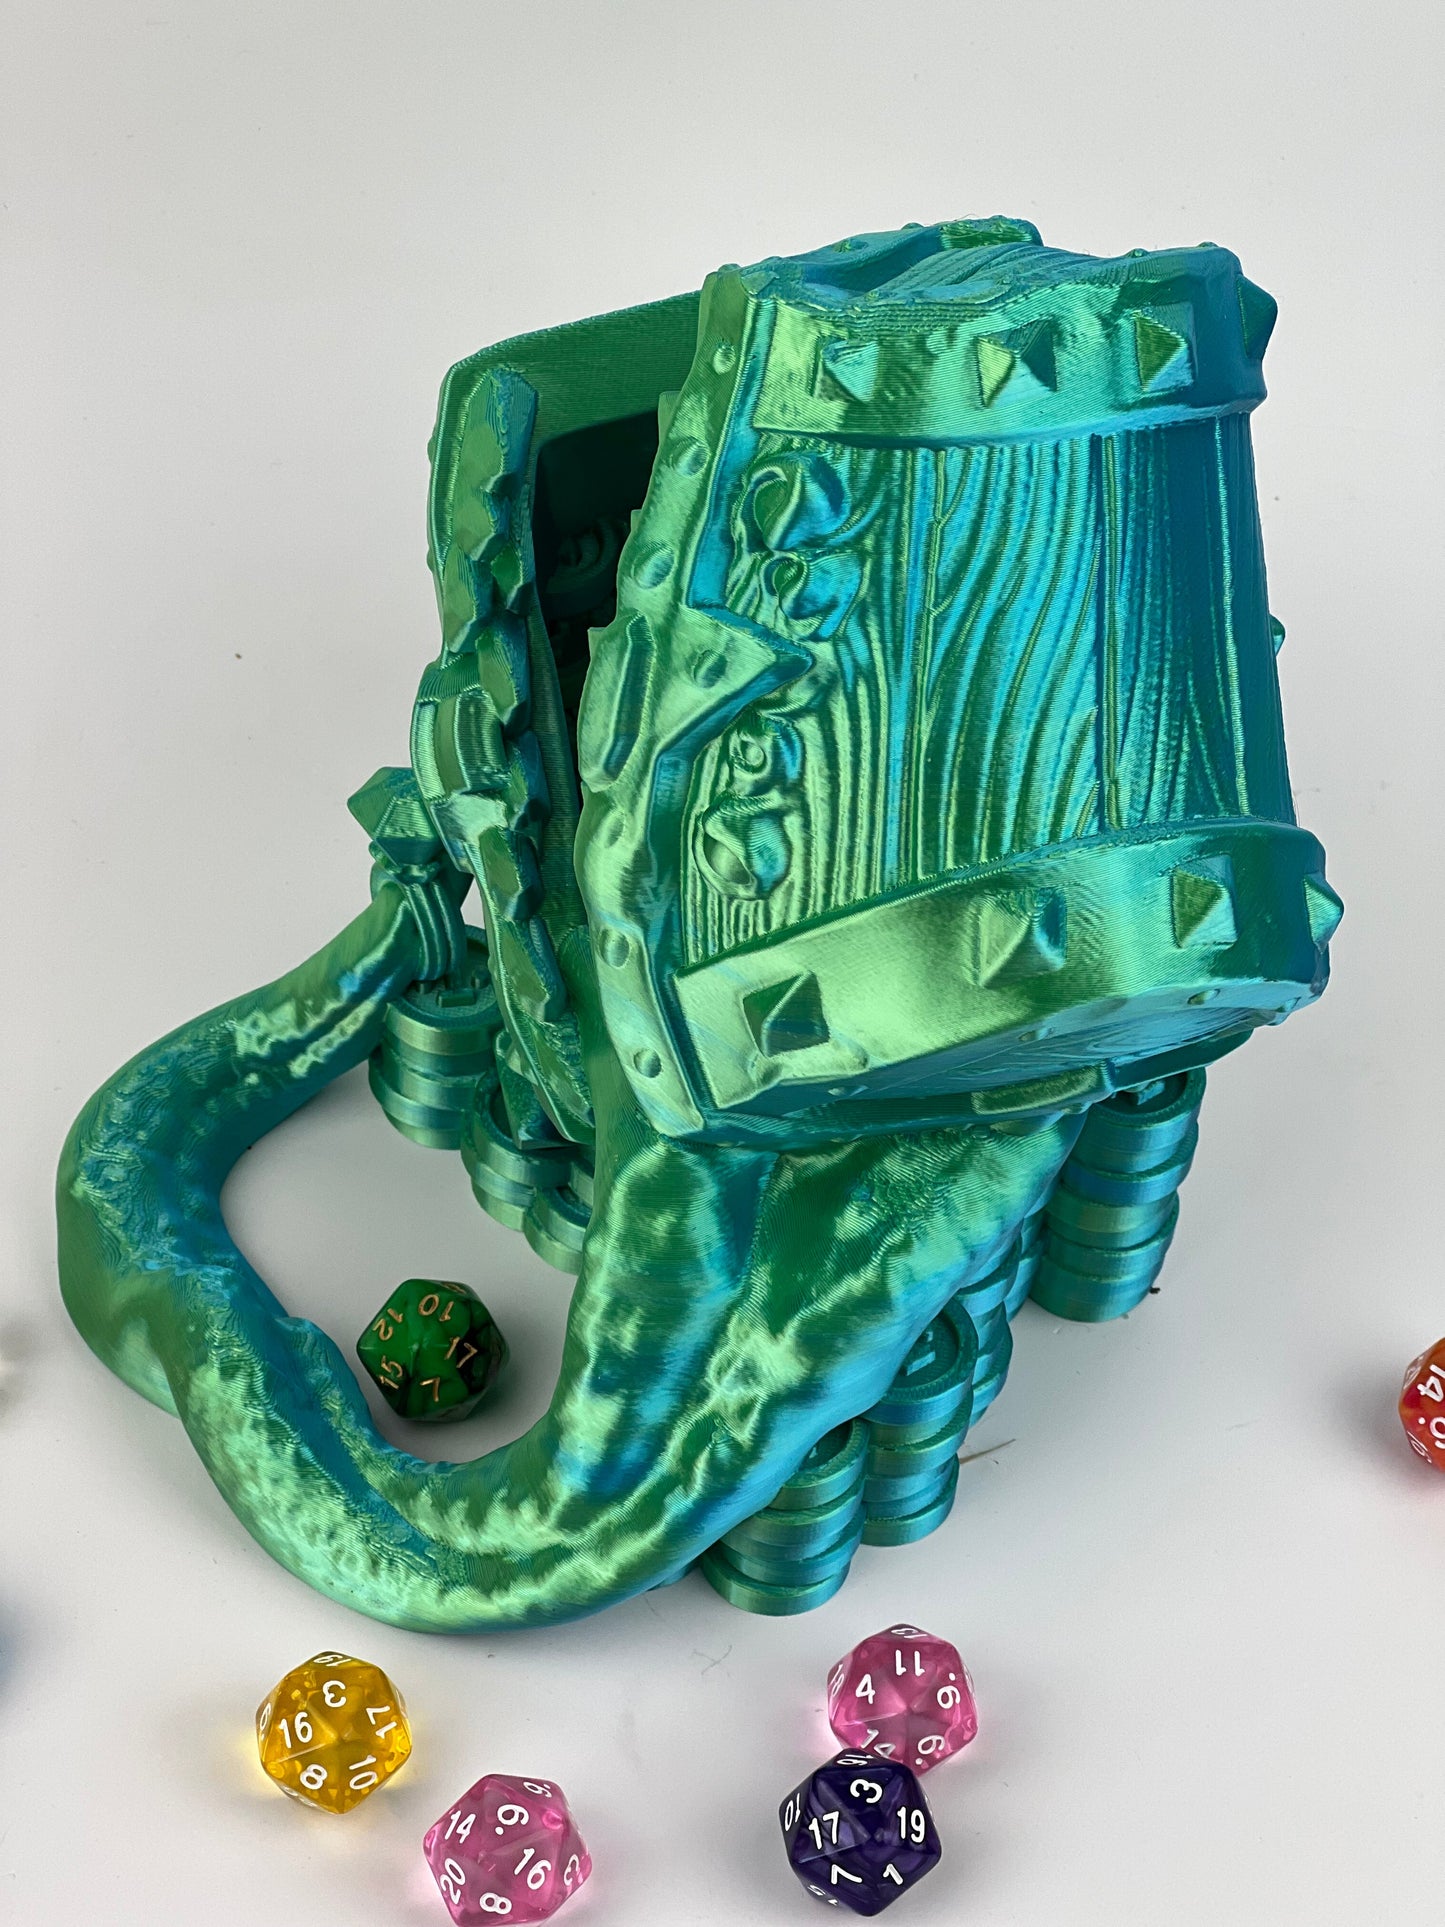 Spell Books Dice Tower Dual Extrusion Silk